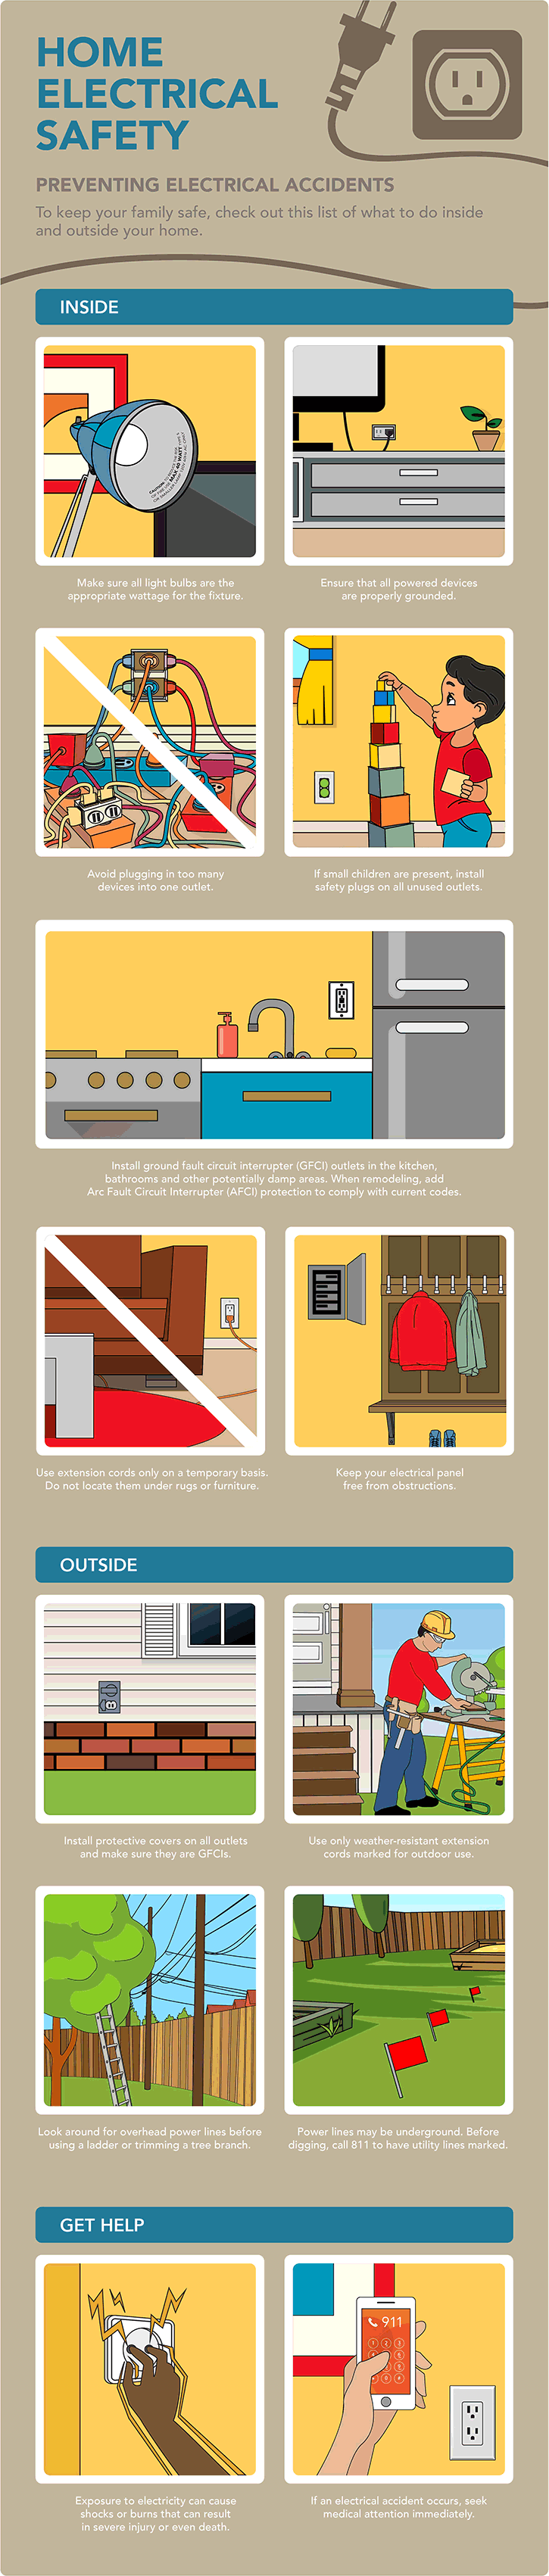 GUIDE: Home Electrical Safety